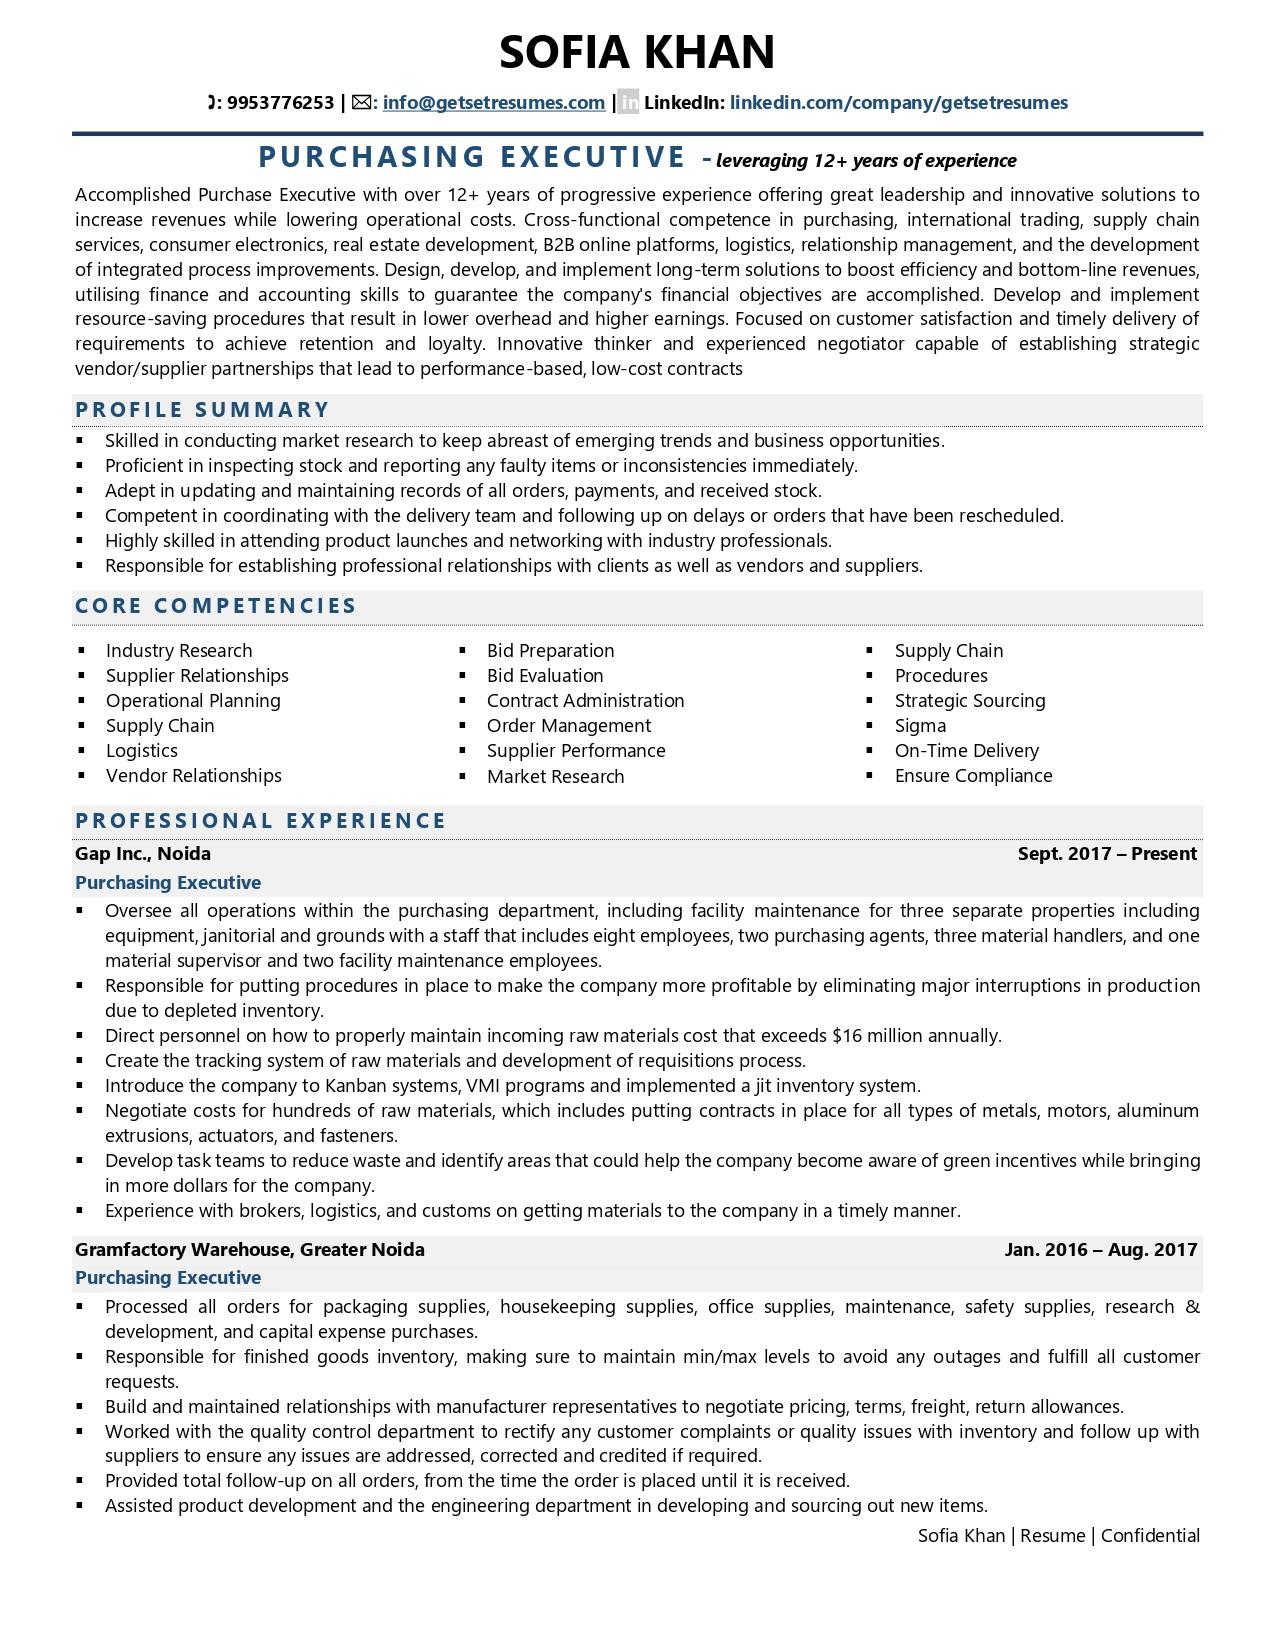 Purchasing Executive - Resume Example & Template